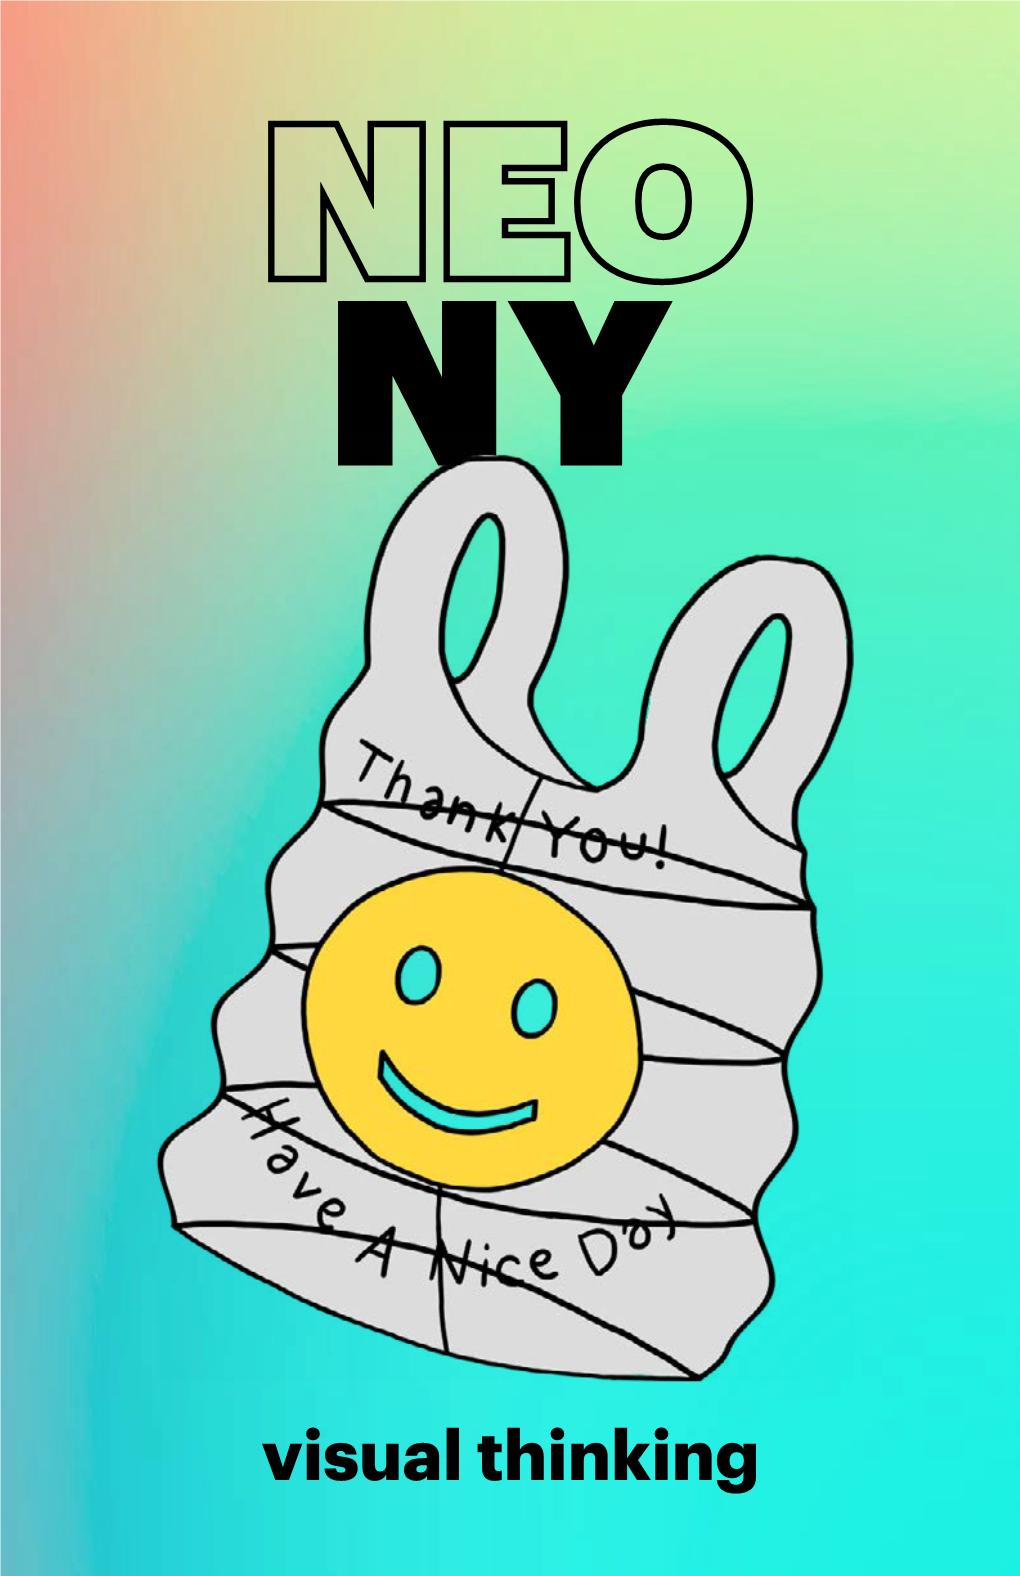 Download Neo New York Publication on Visual Thinking